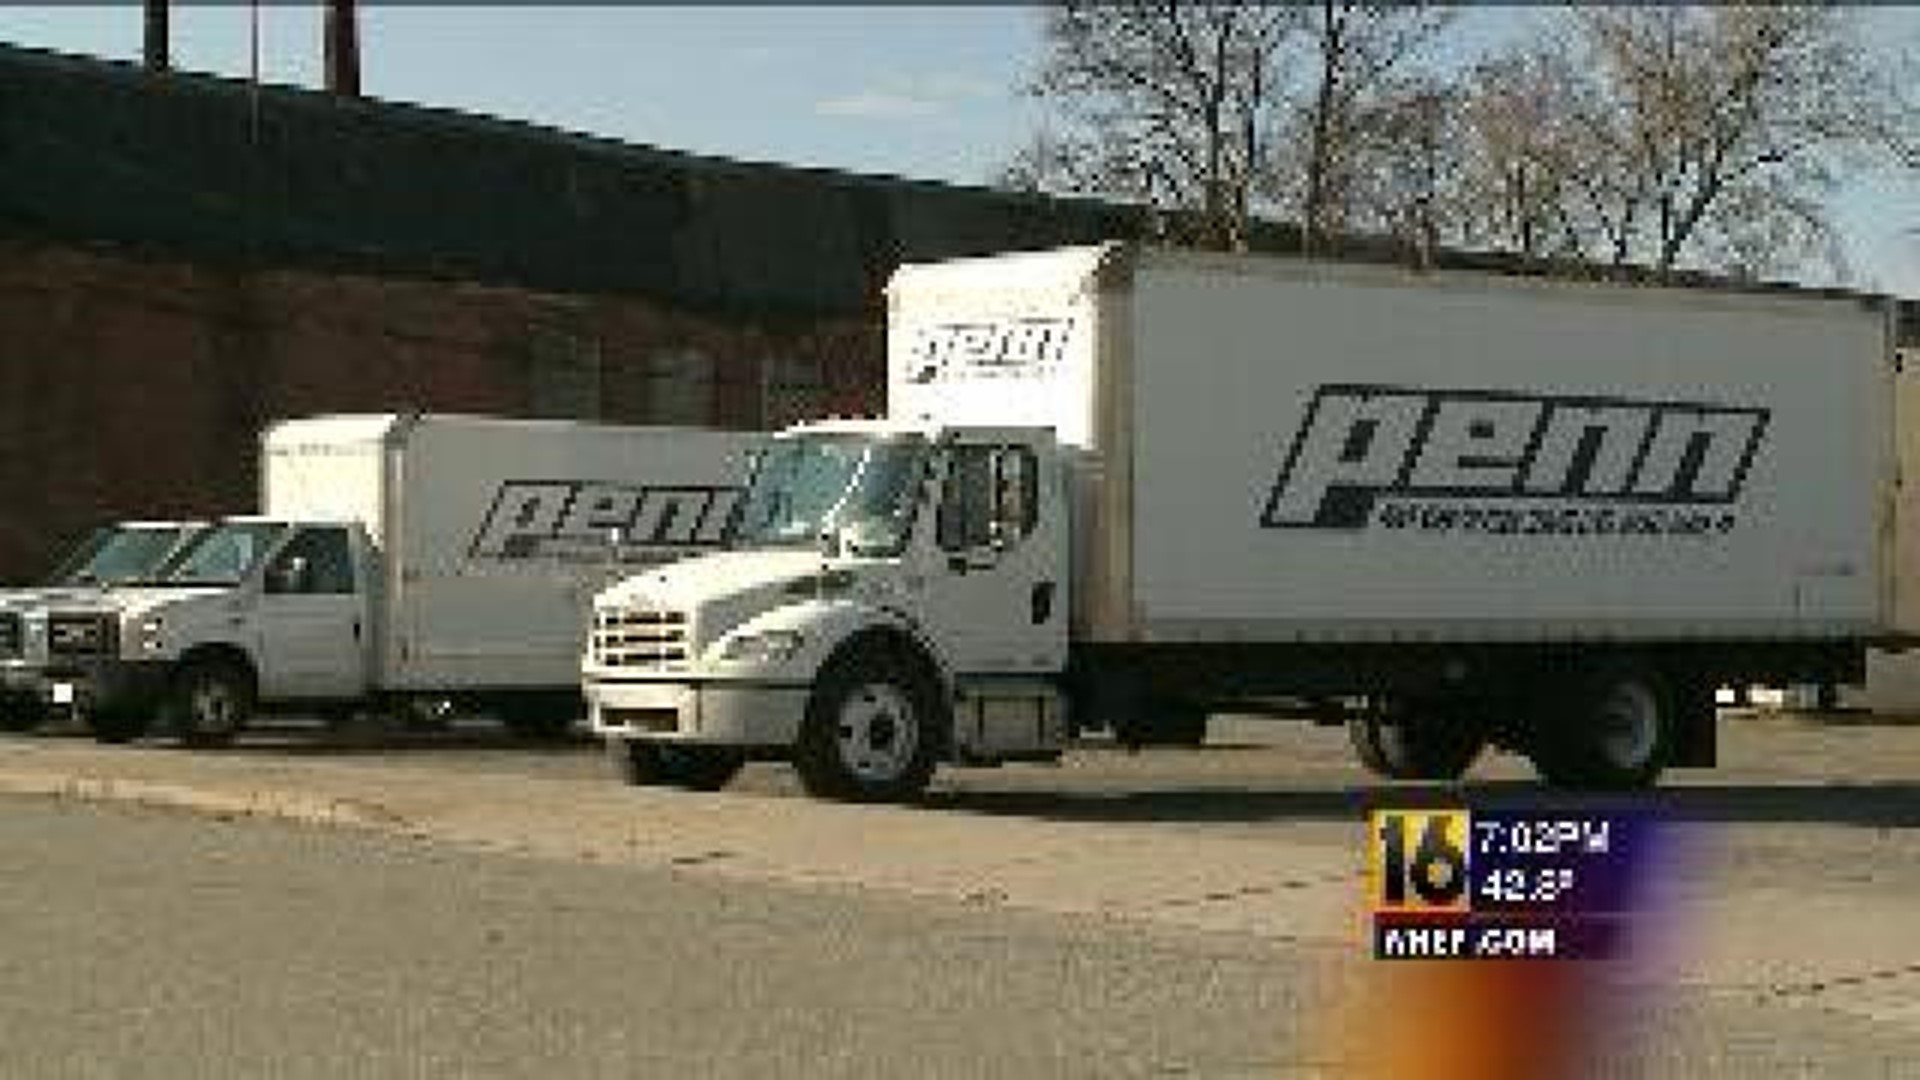 Layoffs At A Luzerne County Business